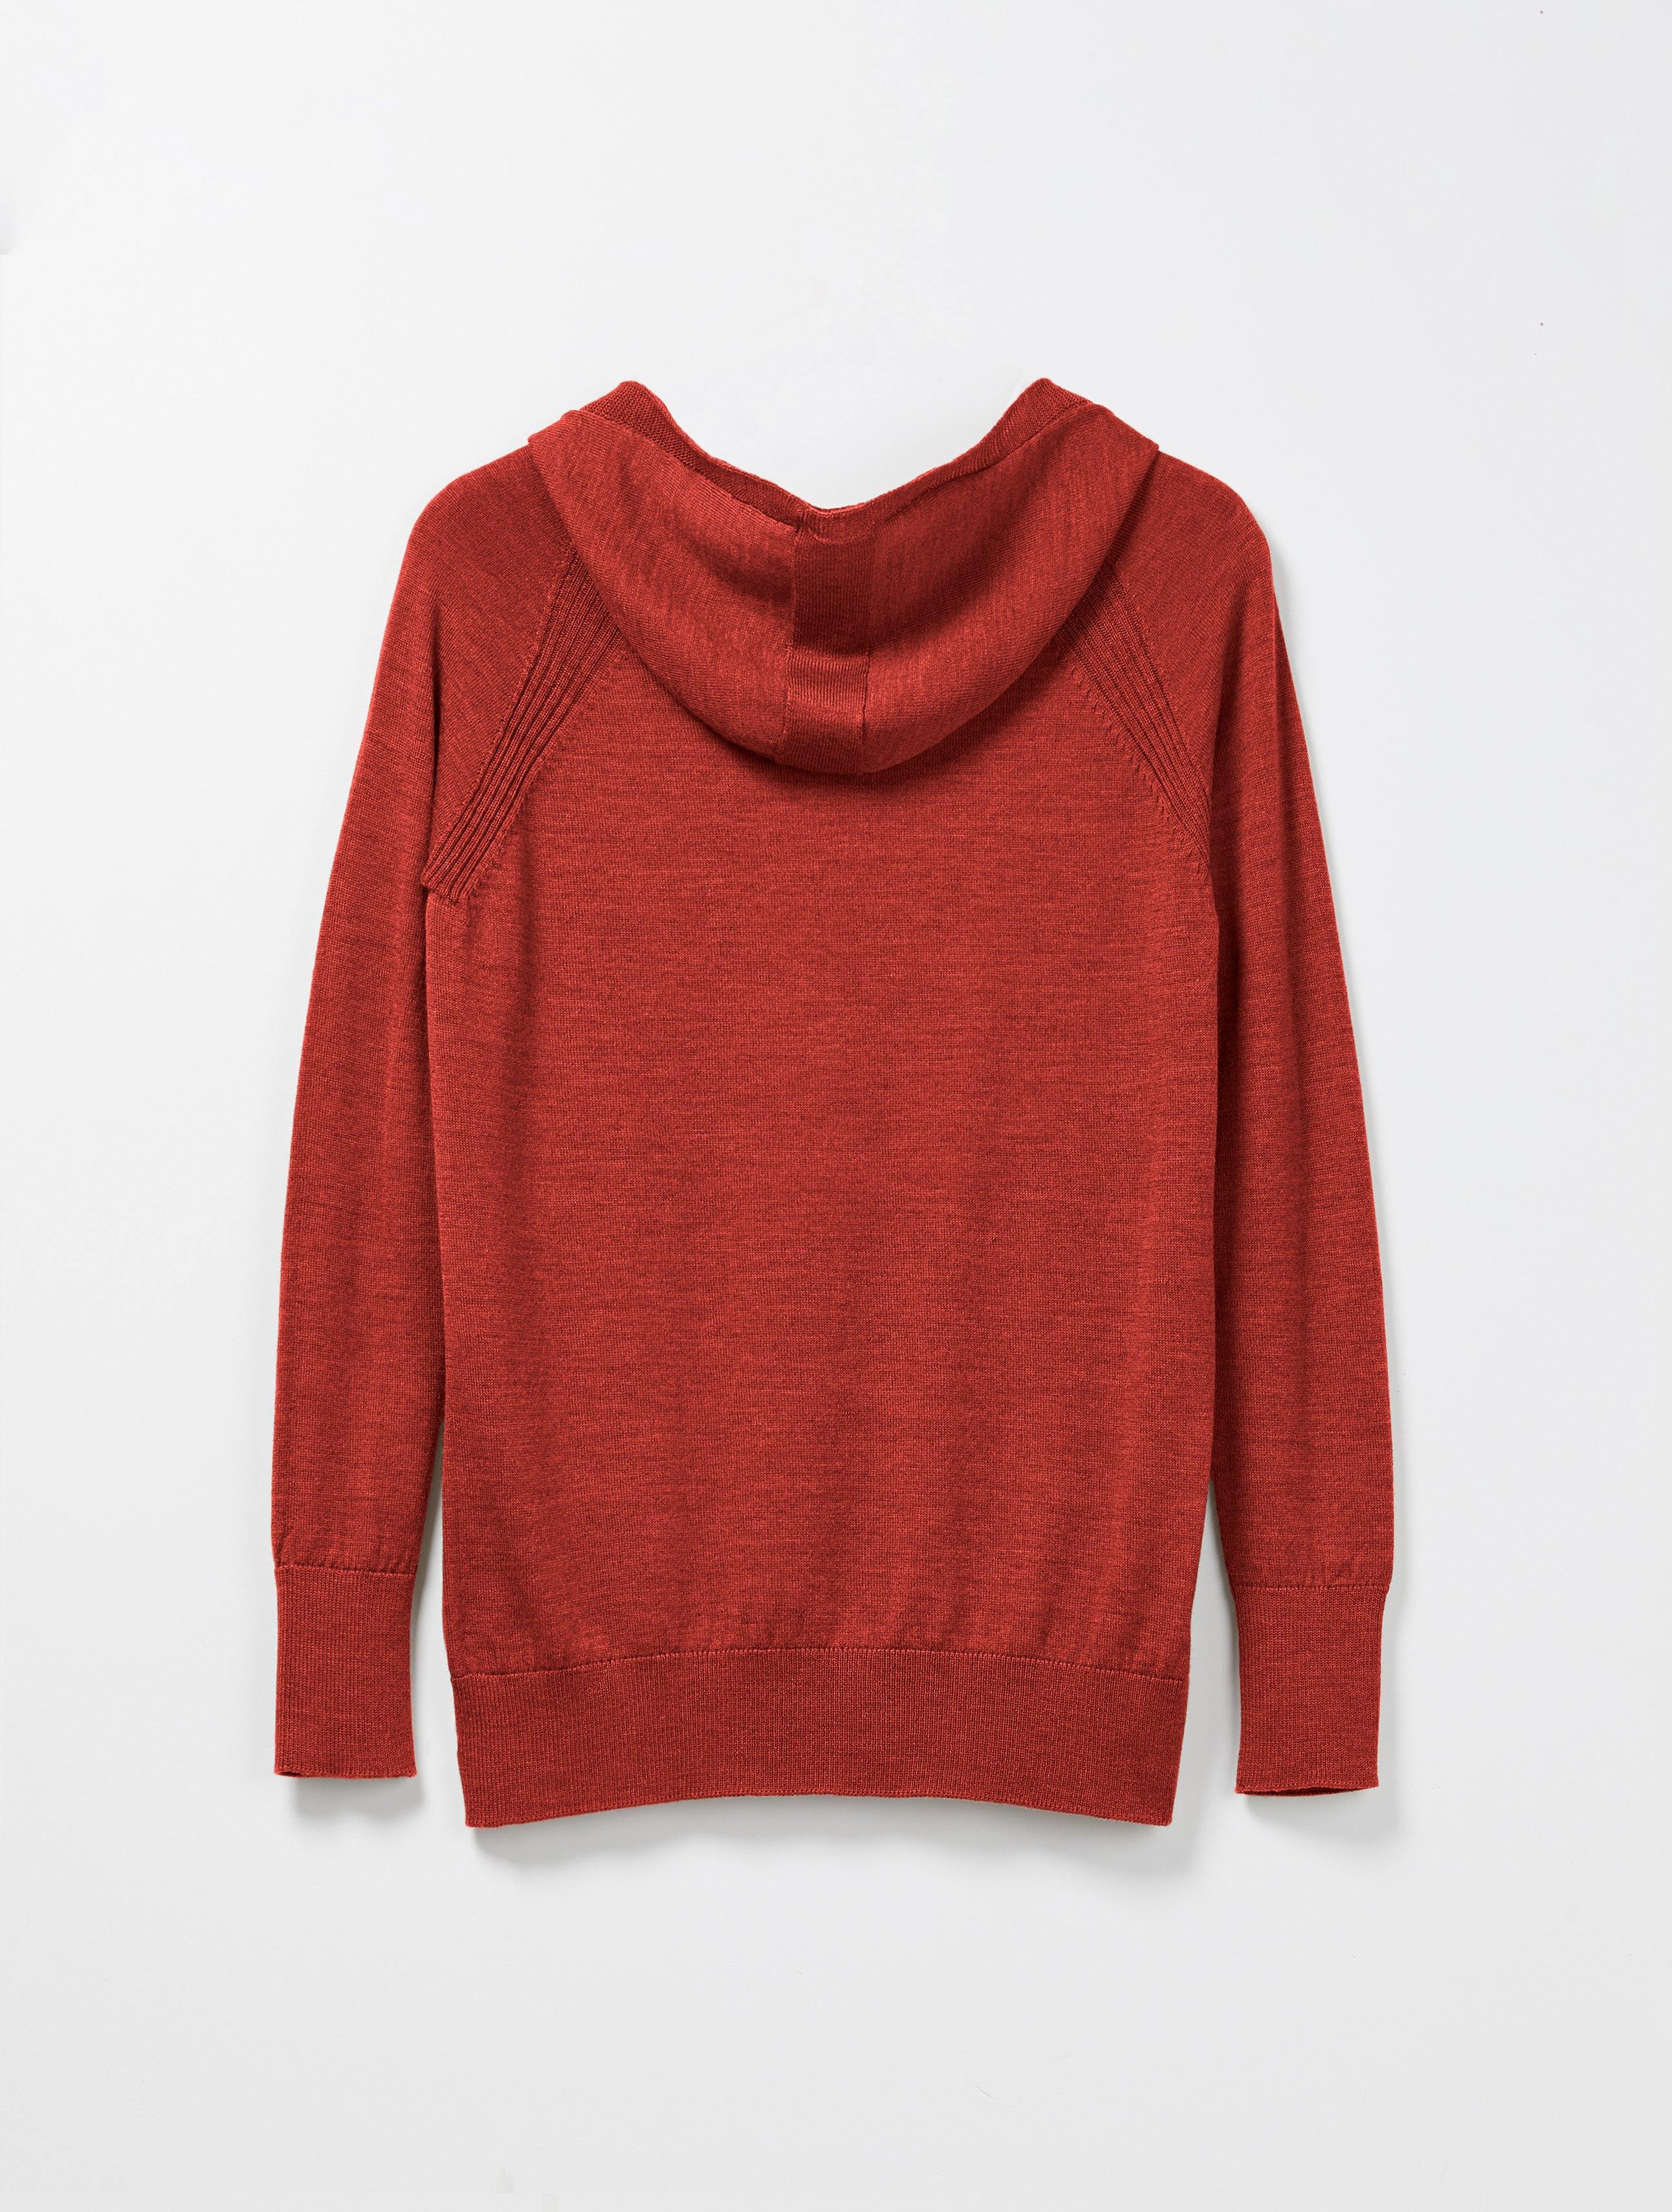 Perriand Hooded Sweater